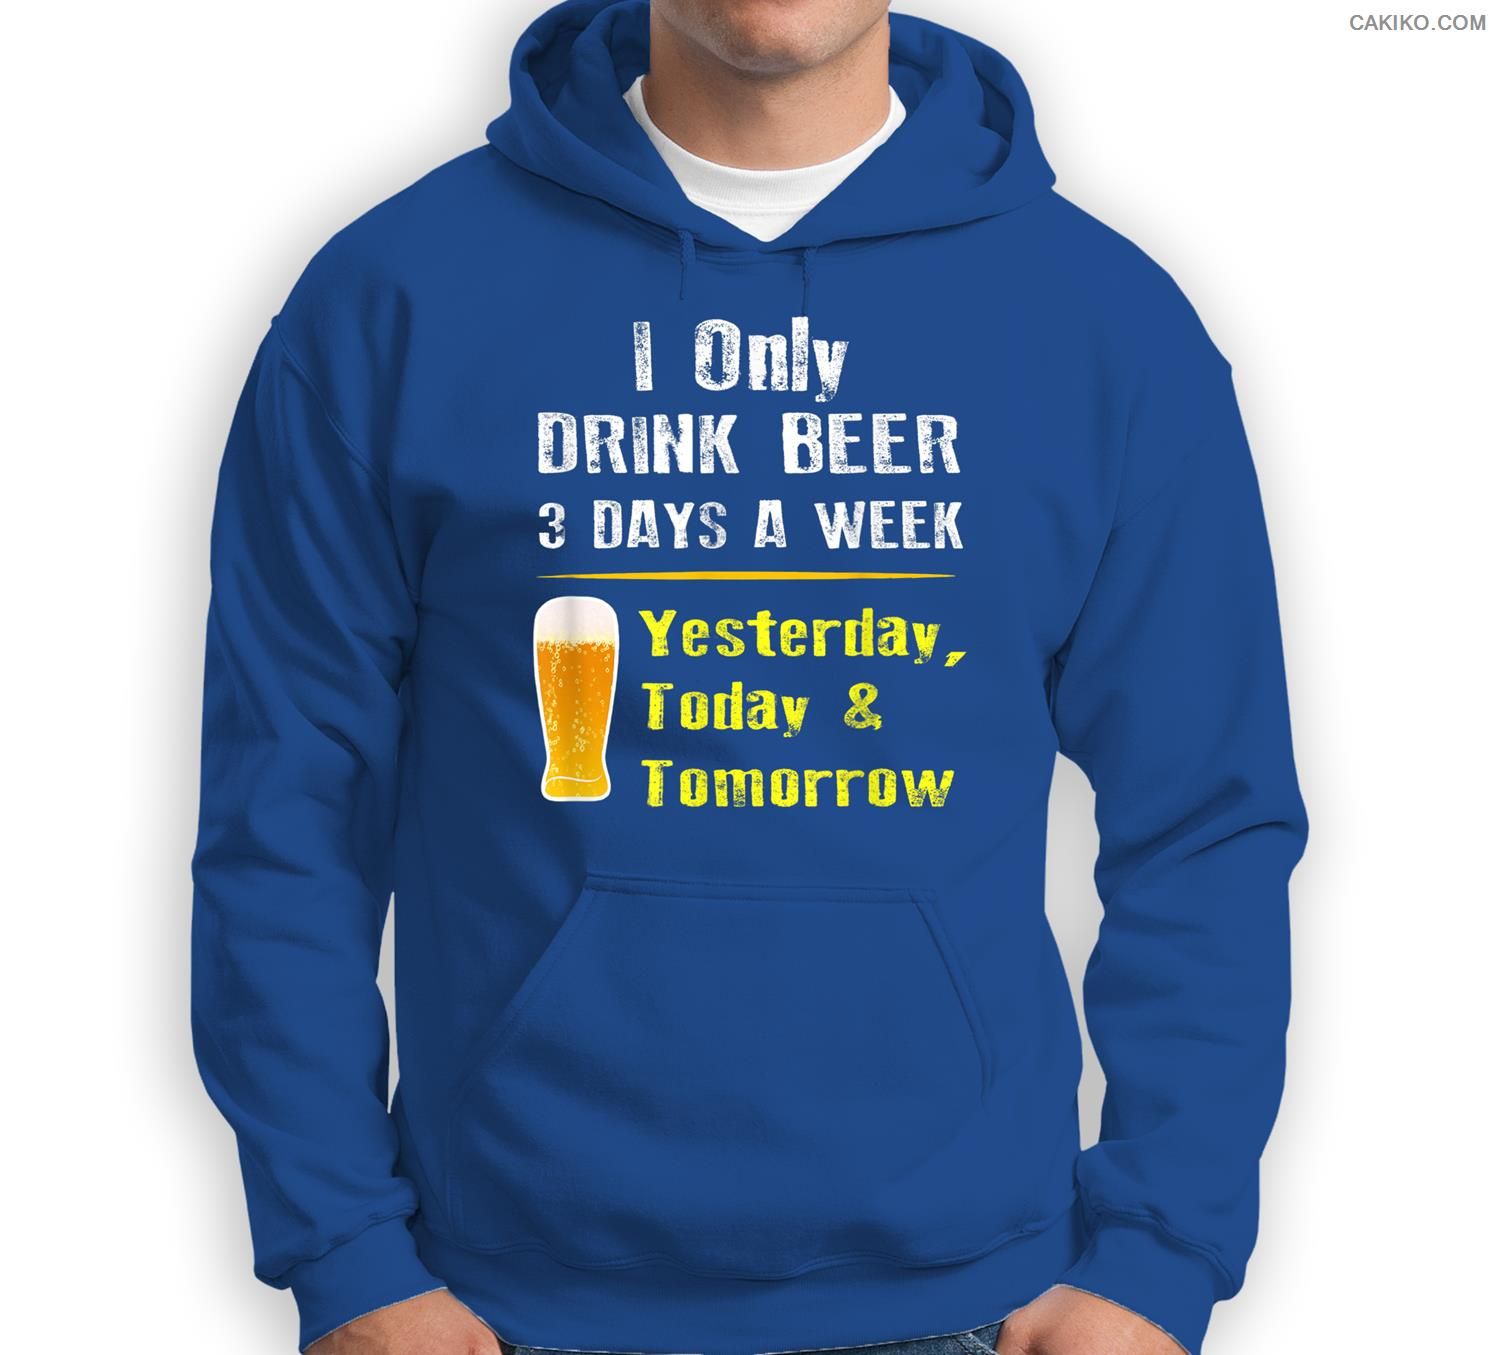 I Only Drink Beer 3 Days A Week – Funny Beer Day Quotes Sweatshirt & Hoodie